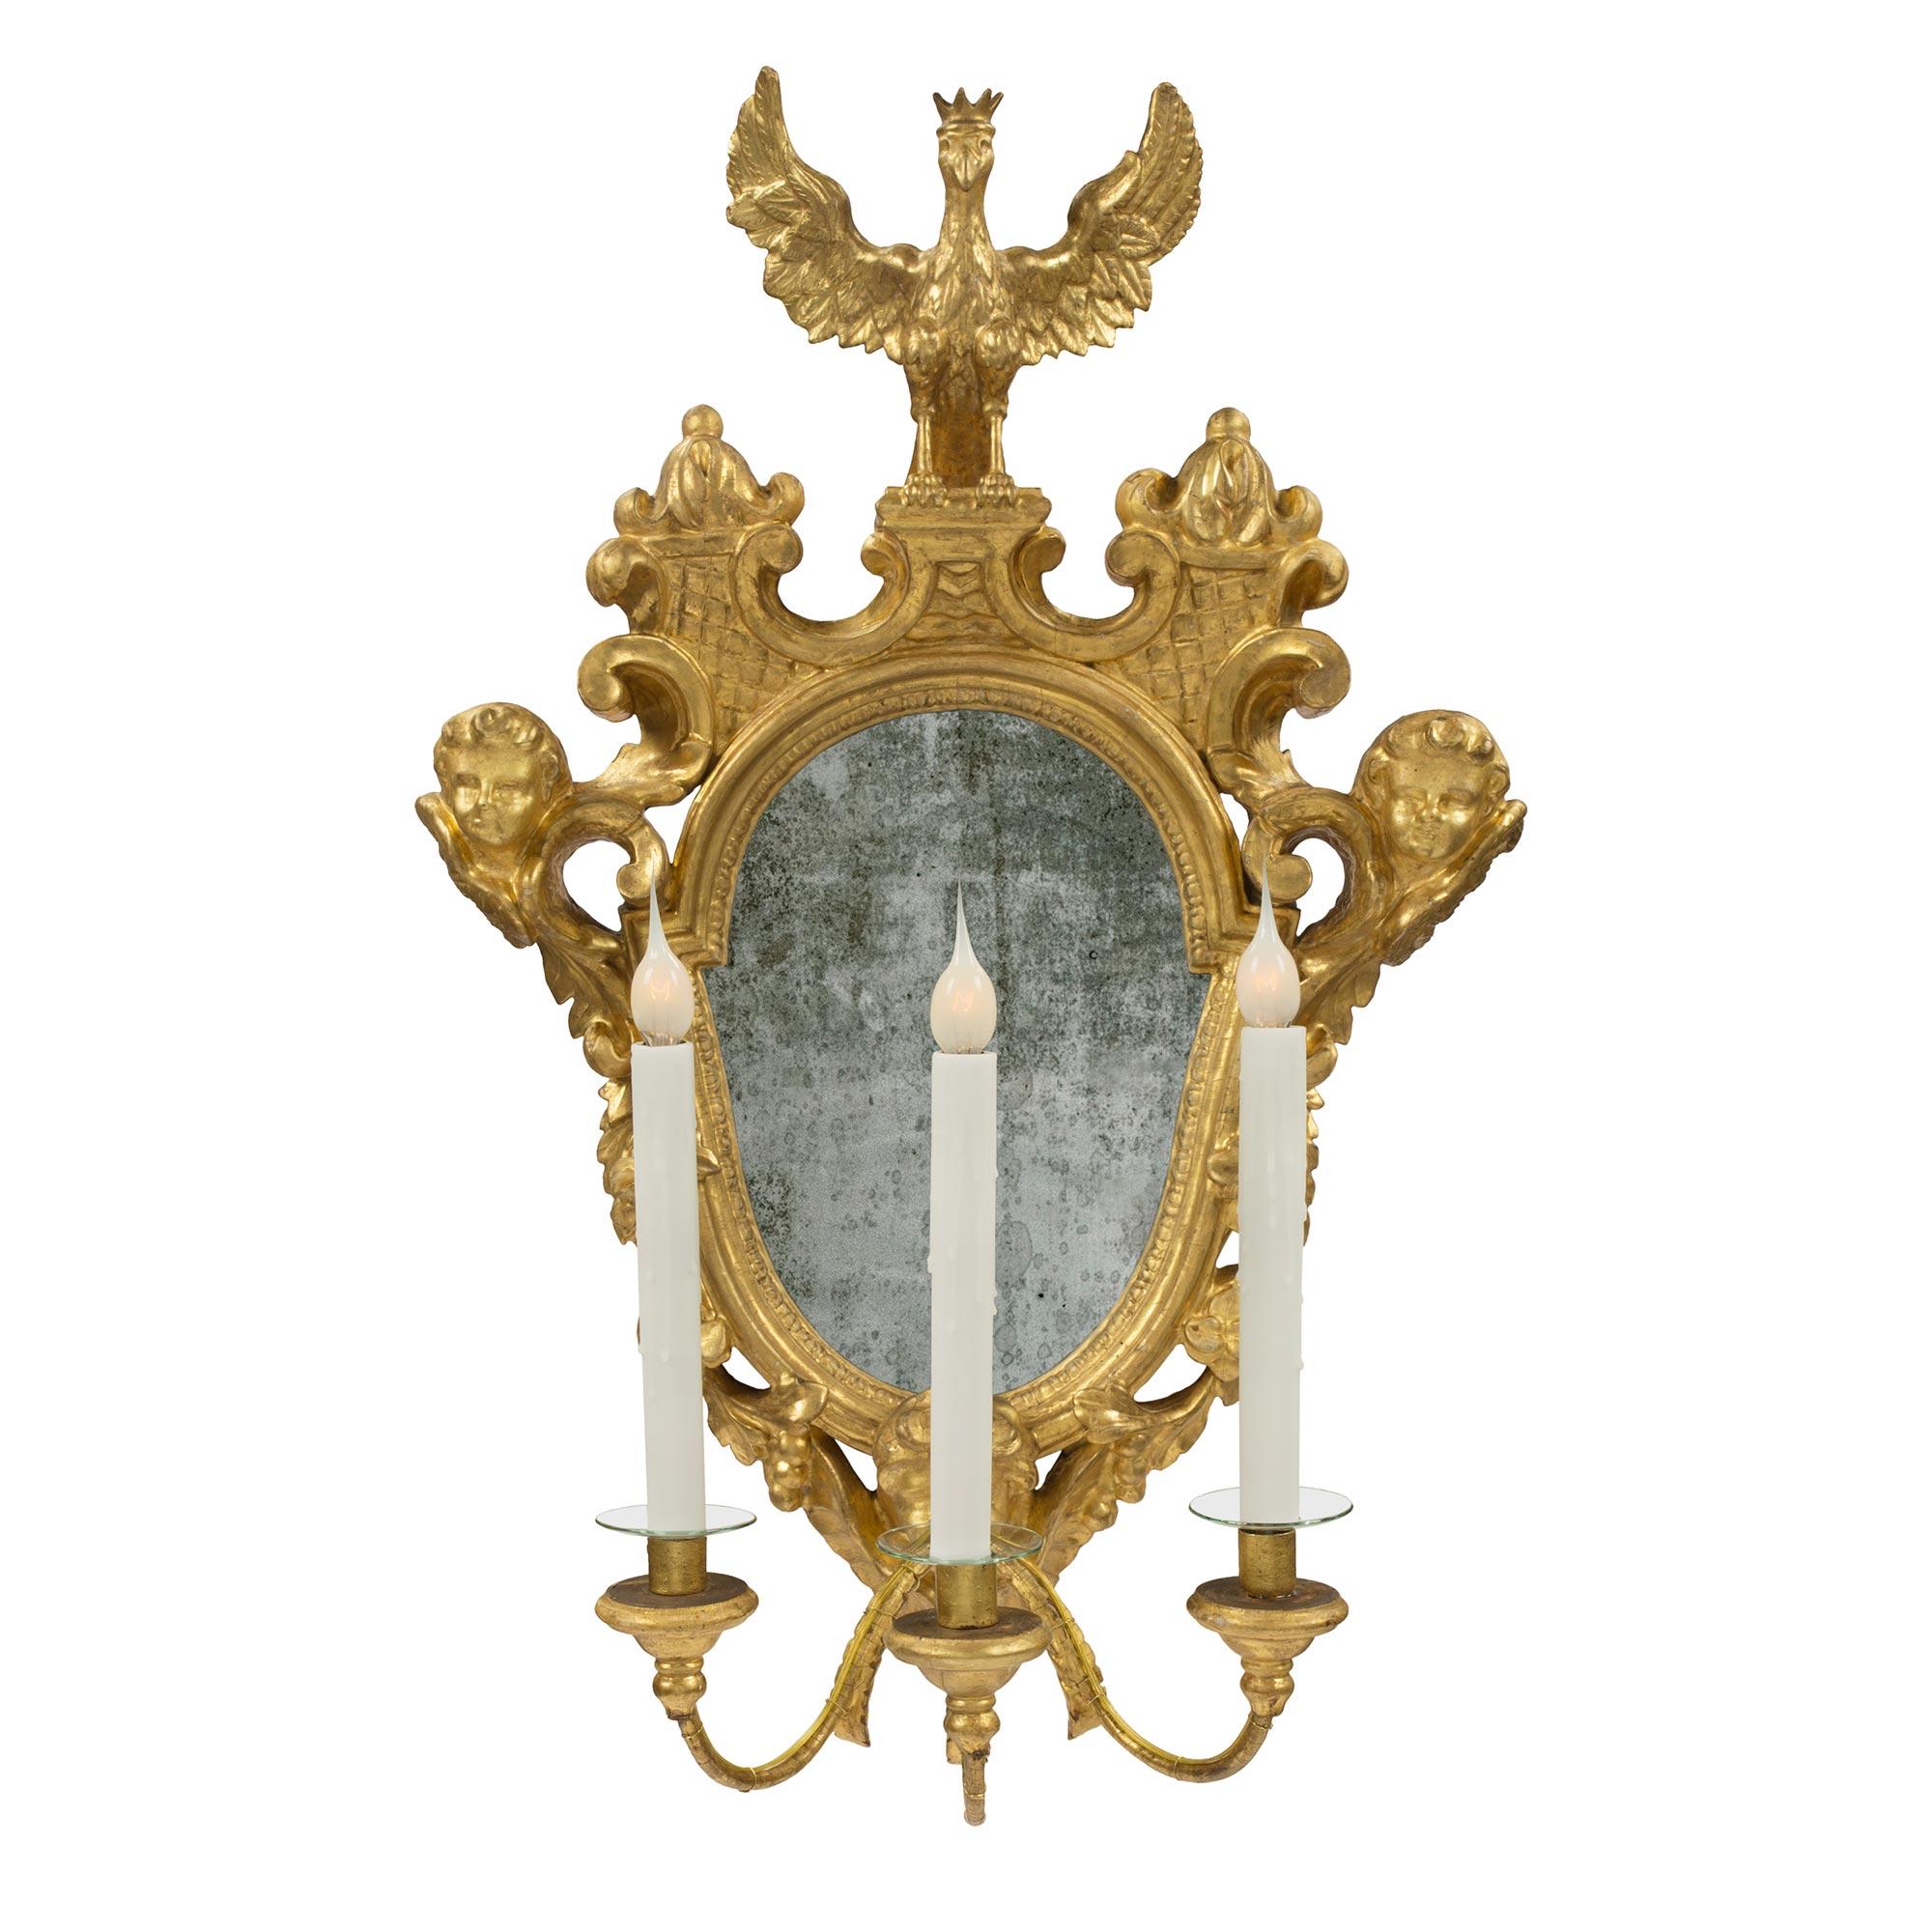 A spectacular, extremely high quality and unique set of four Roman 18th century giltwood electrified mirrored sconces. At the bottom of each mirror, three S scrolled arms protrude from the charming face of a cherub. Each arm is decorated with